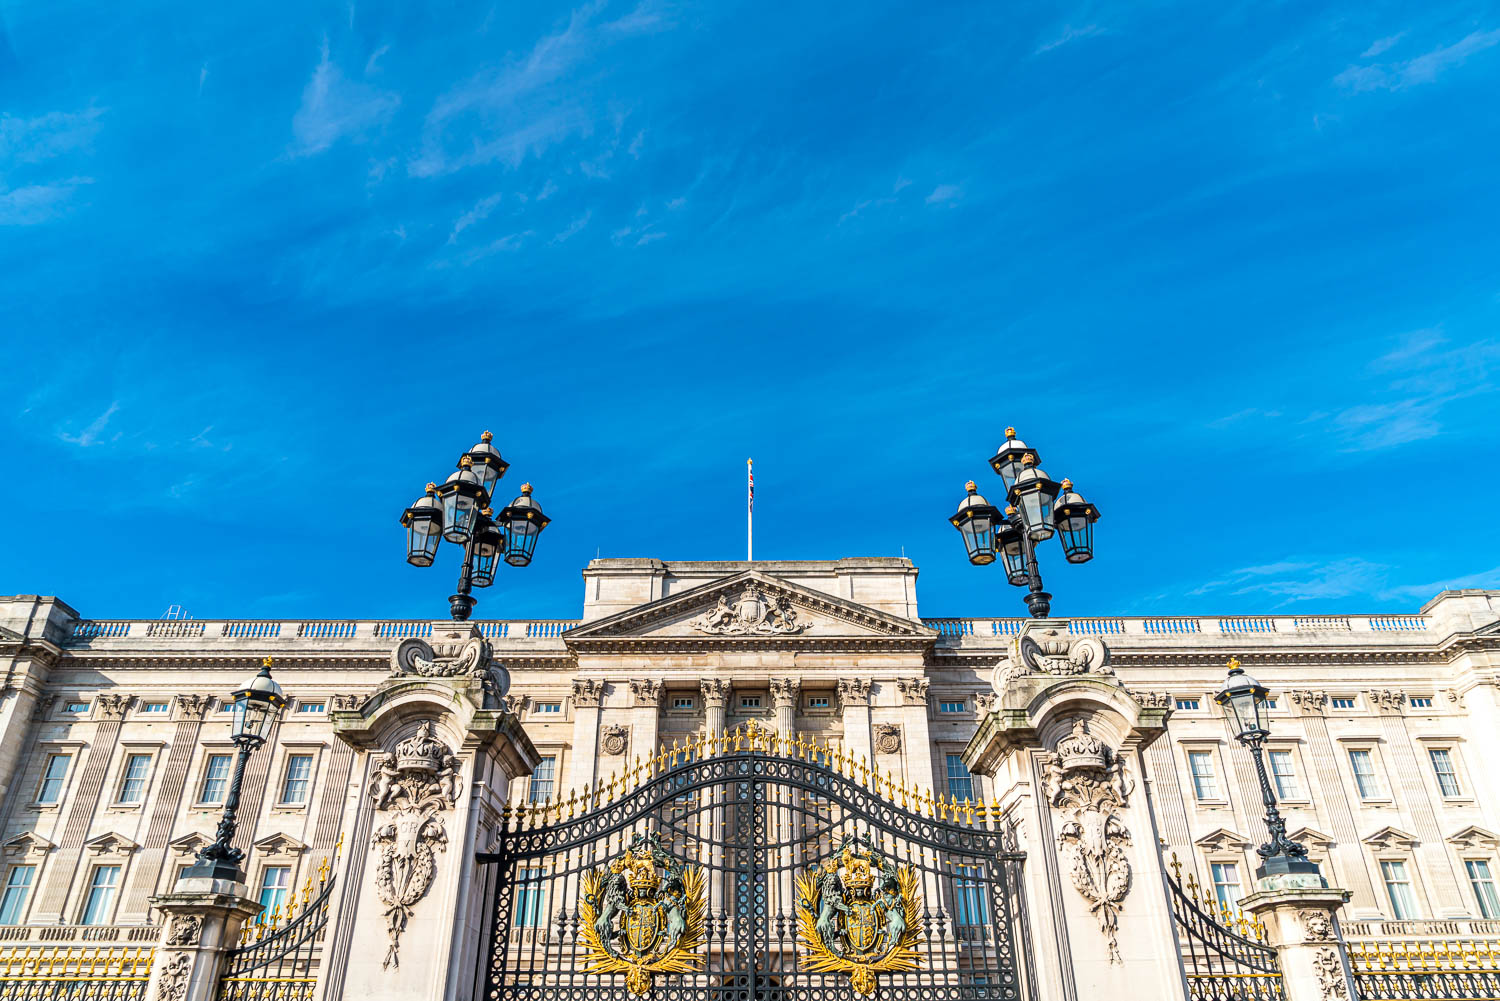 Gilded gates and front view of Buckingham Palace - the best of the many royal places in London to see with kids